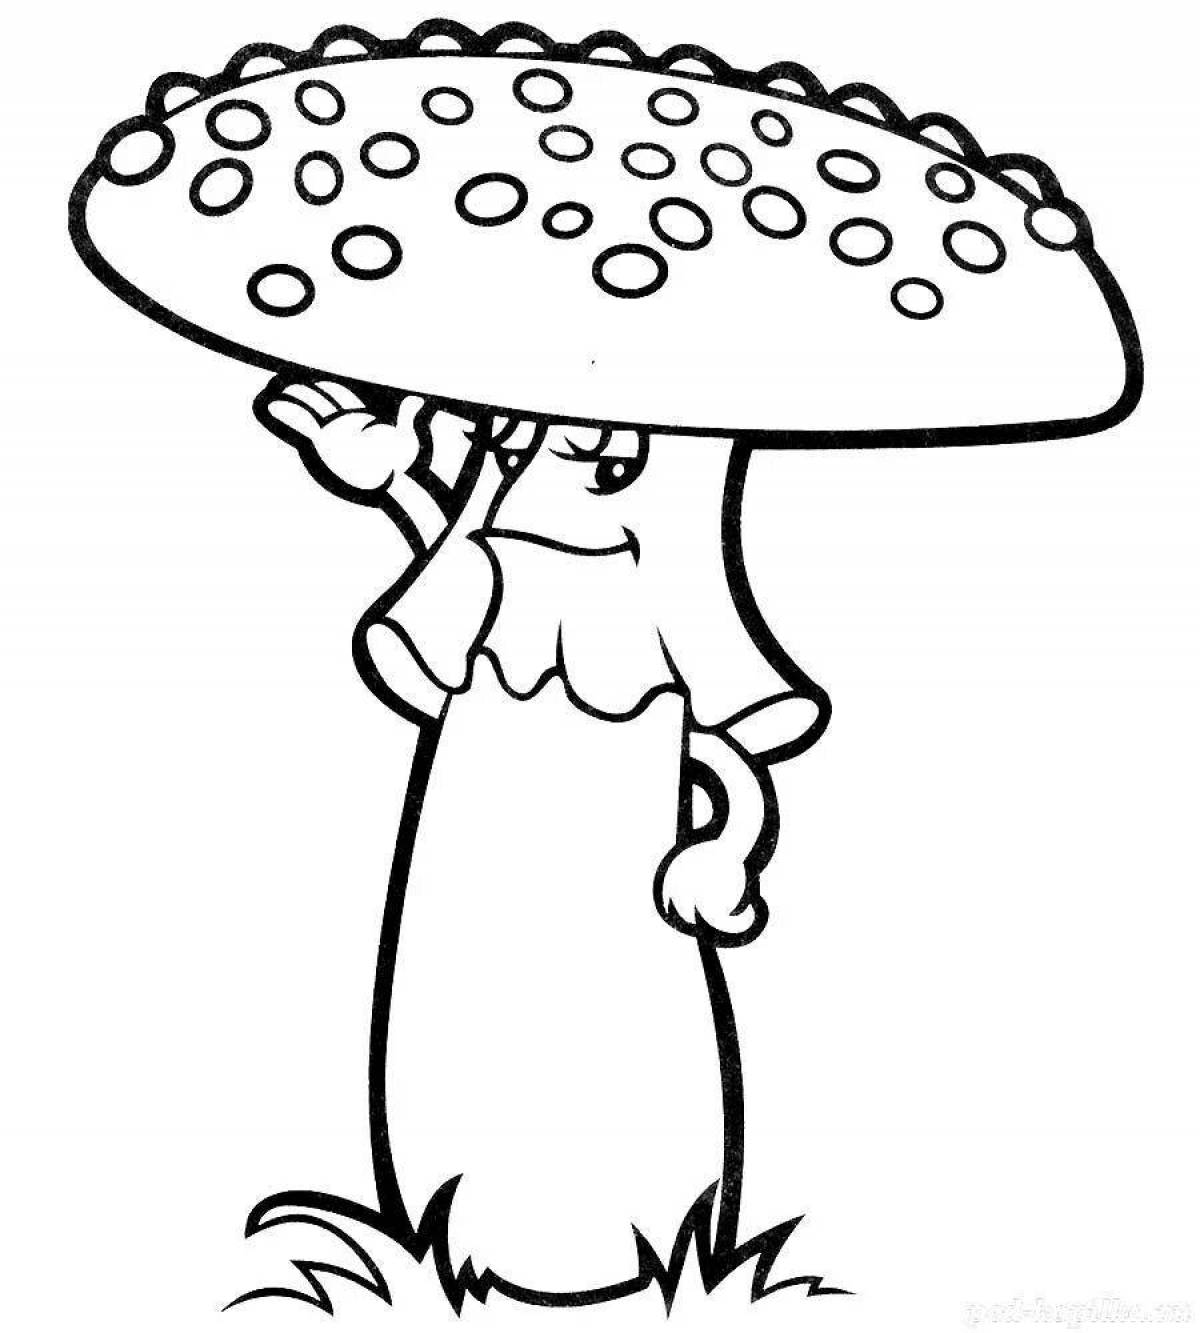 Adorable mushroom fly agaric coloring page